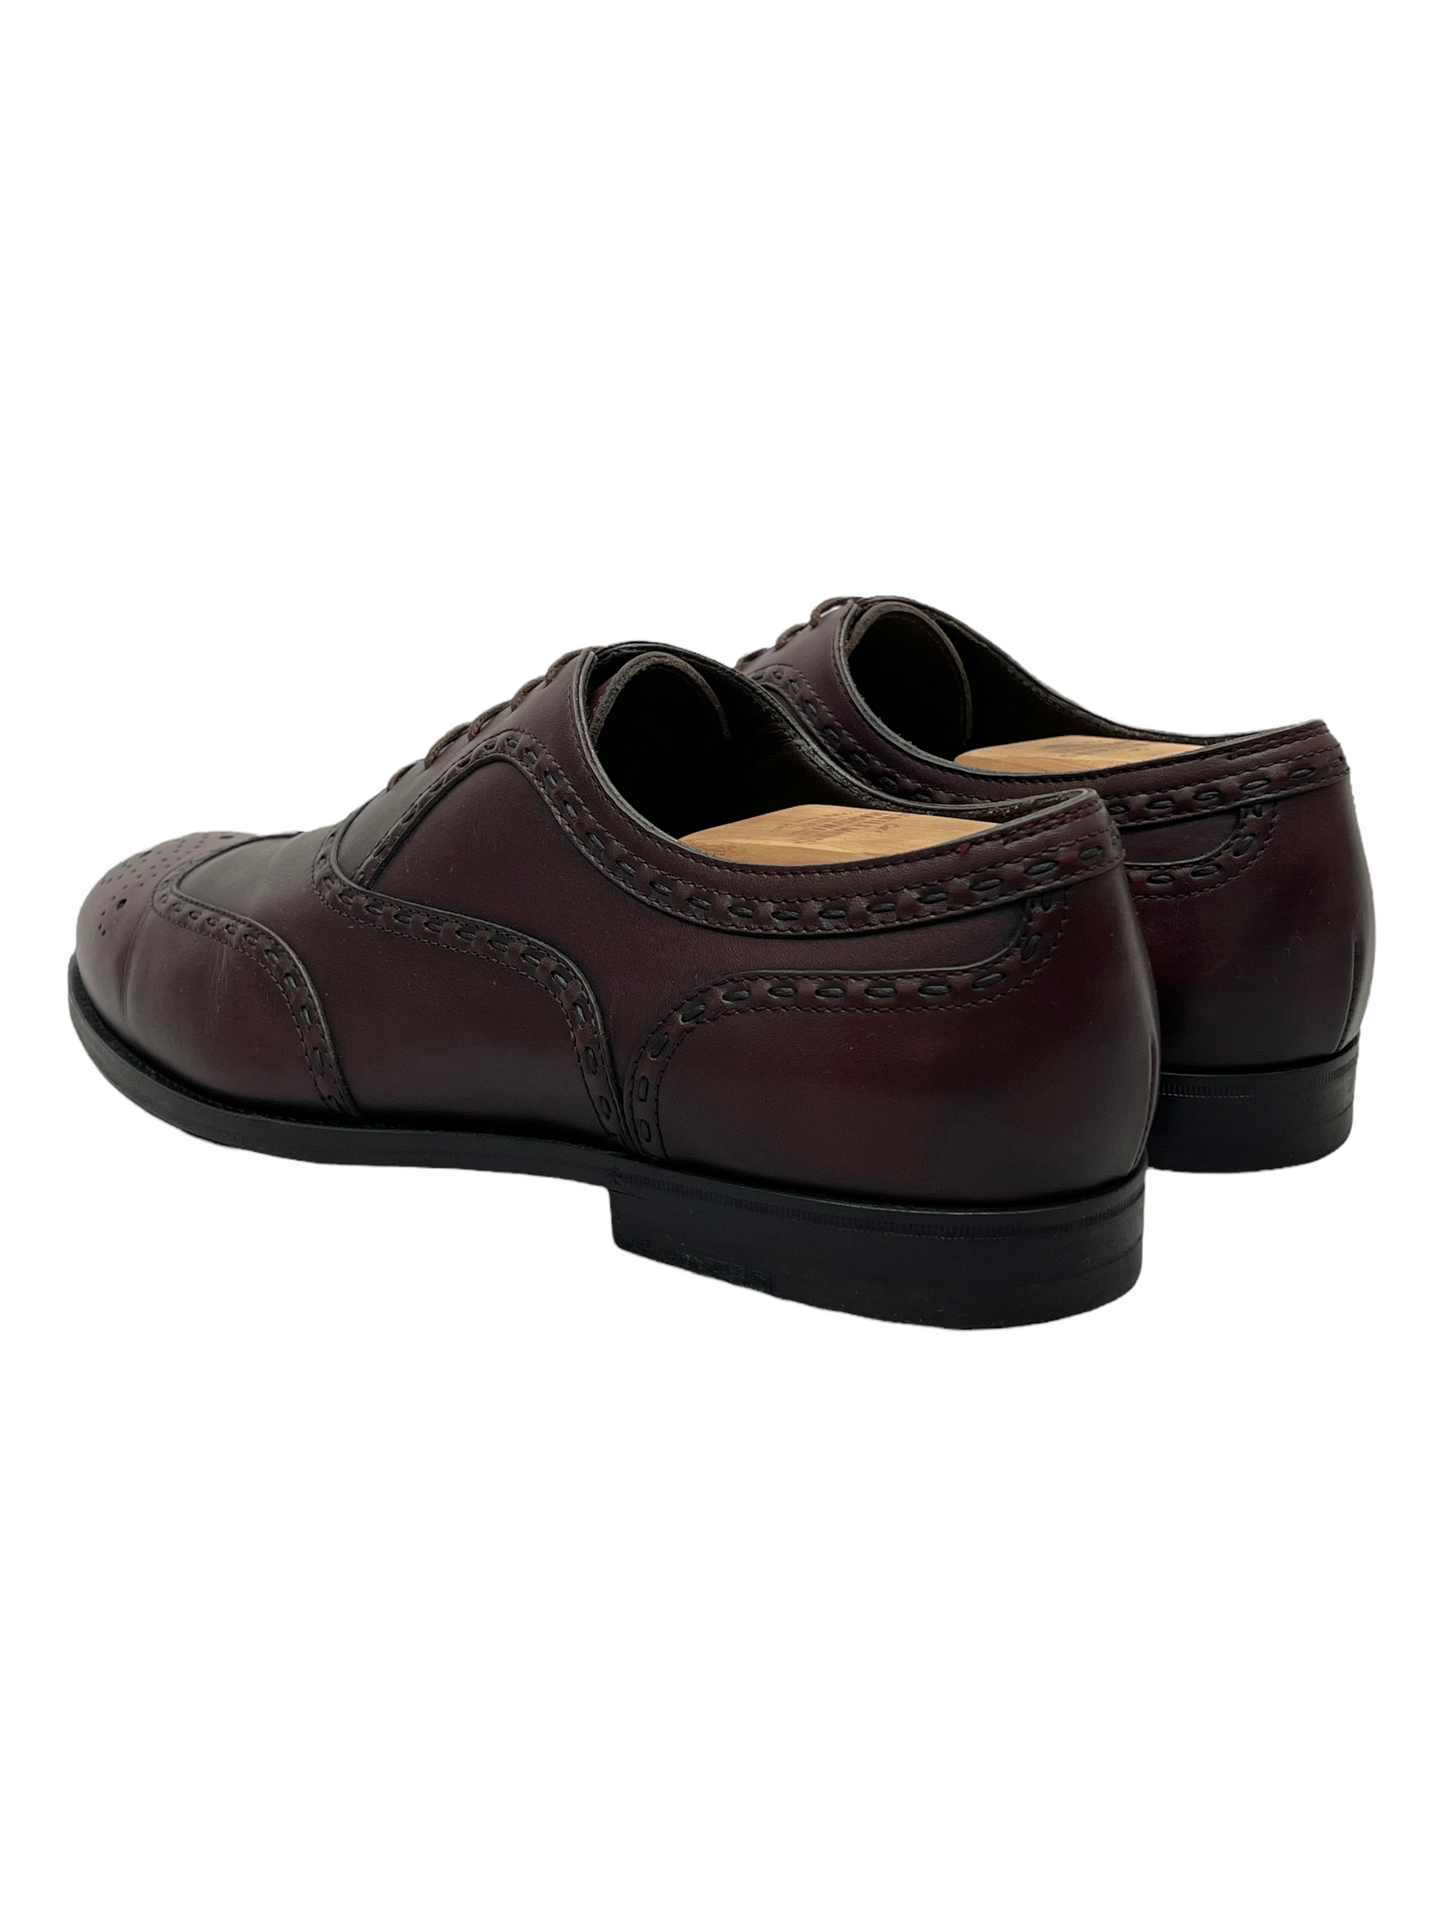 Bottega Veneta Burgundy Oxford Brogue Dress Shoes 8 US - Genuine Design Luxury Consignment for Men. New & Pre-Owned Clothing, Shoes, & Accessories. Calgary, Canada